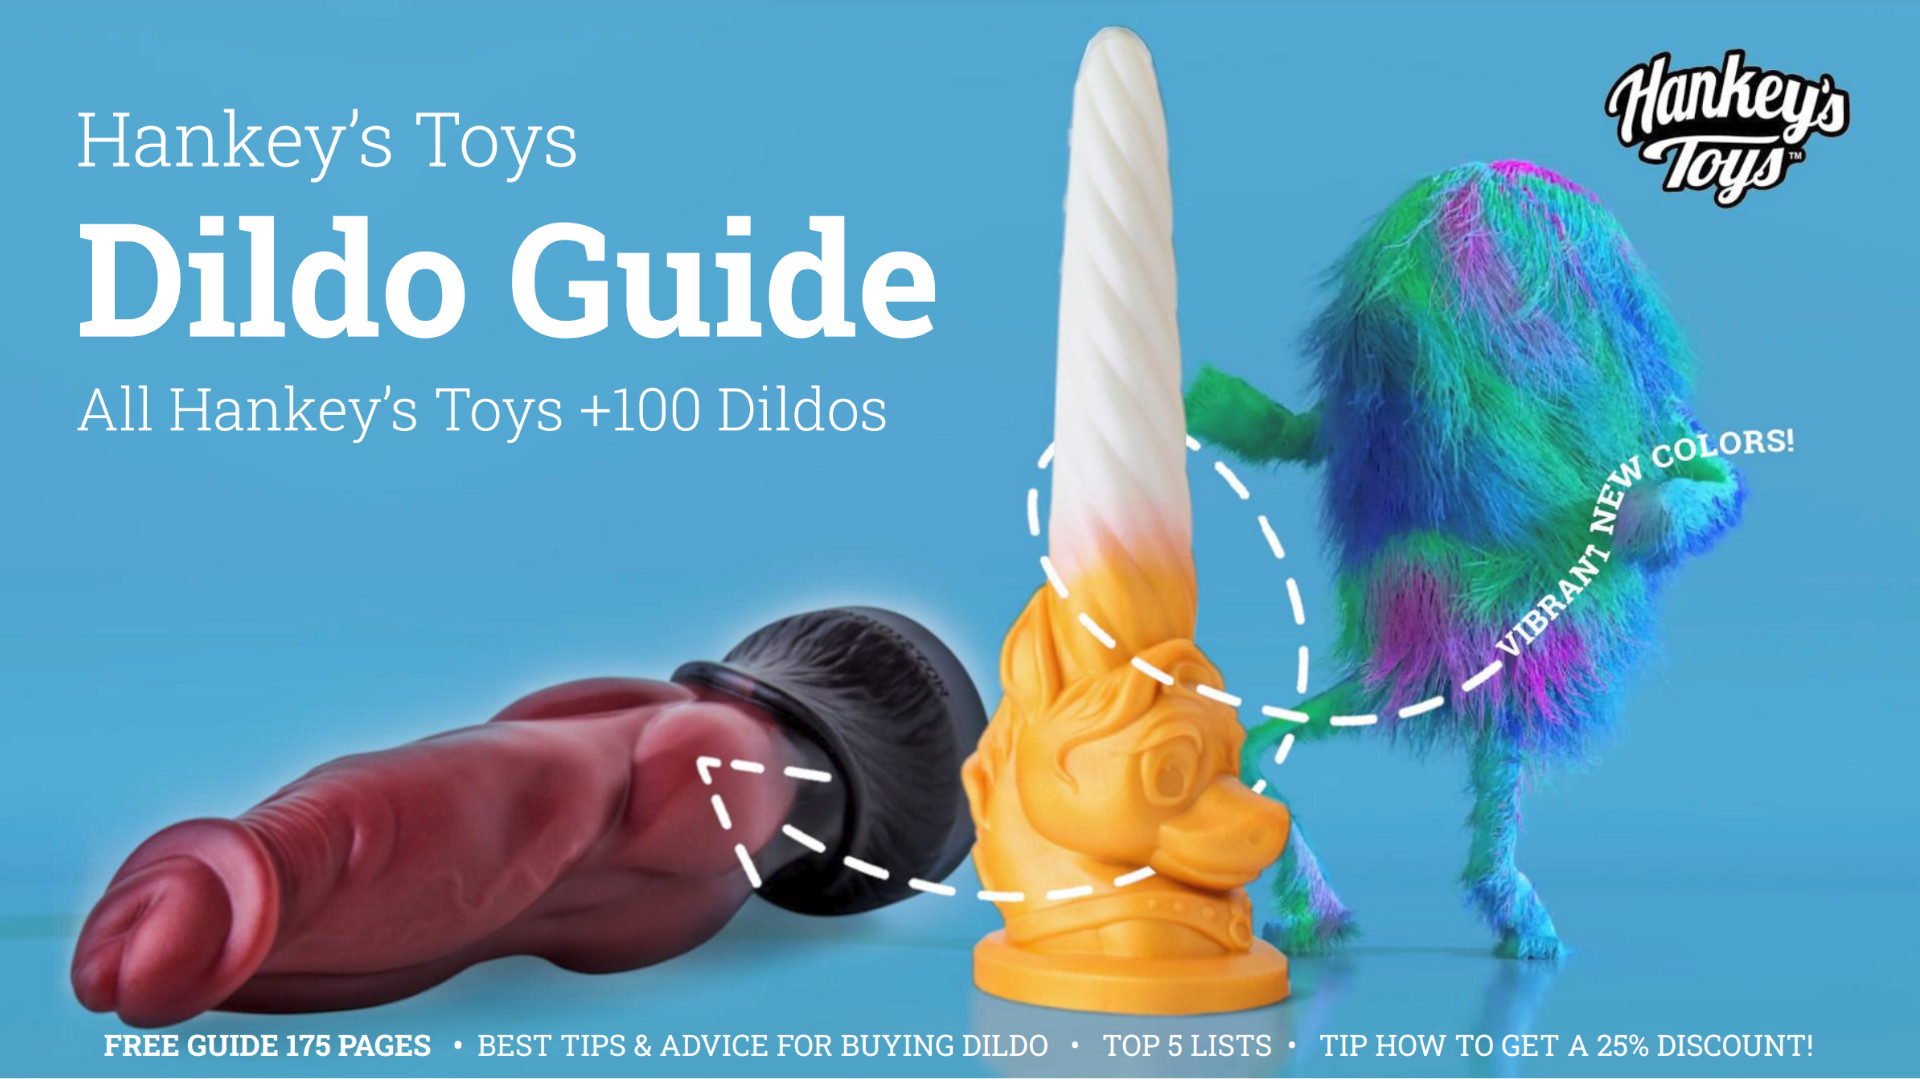 Hankey’s Toys Dildo guide will tell you all Information you need when purchasing a new Dildo.